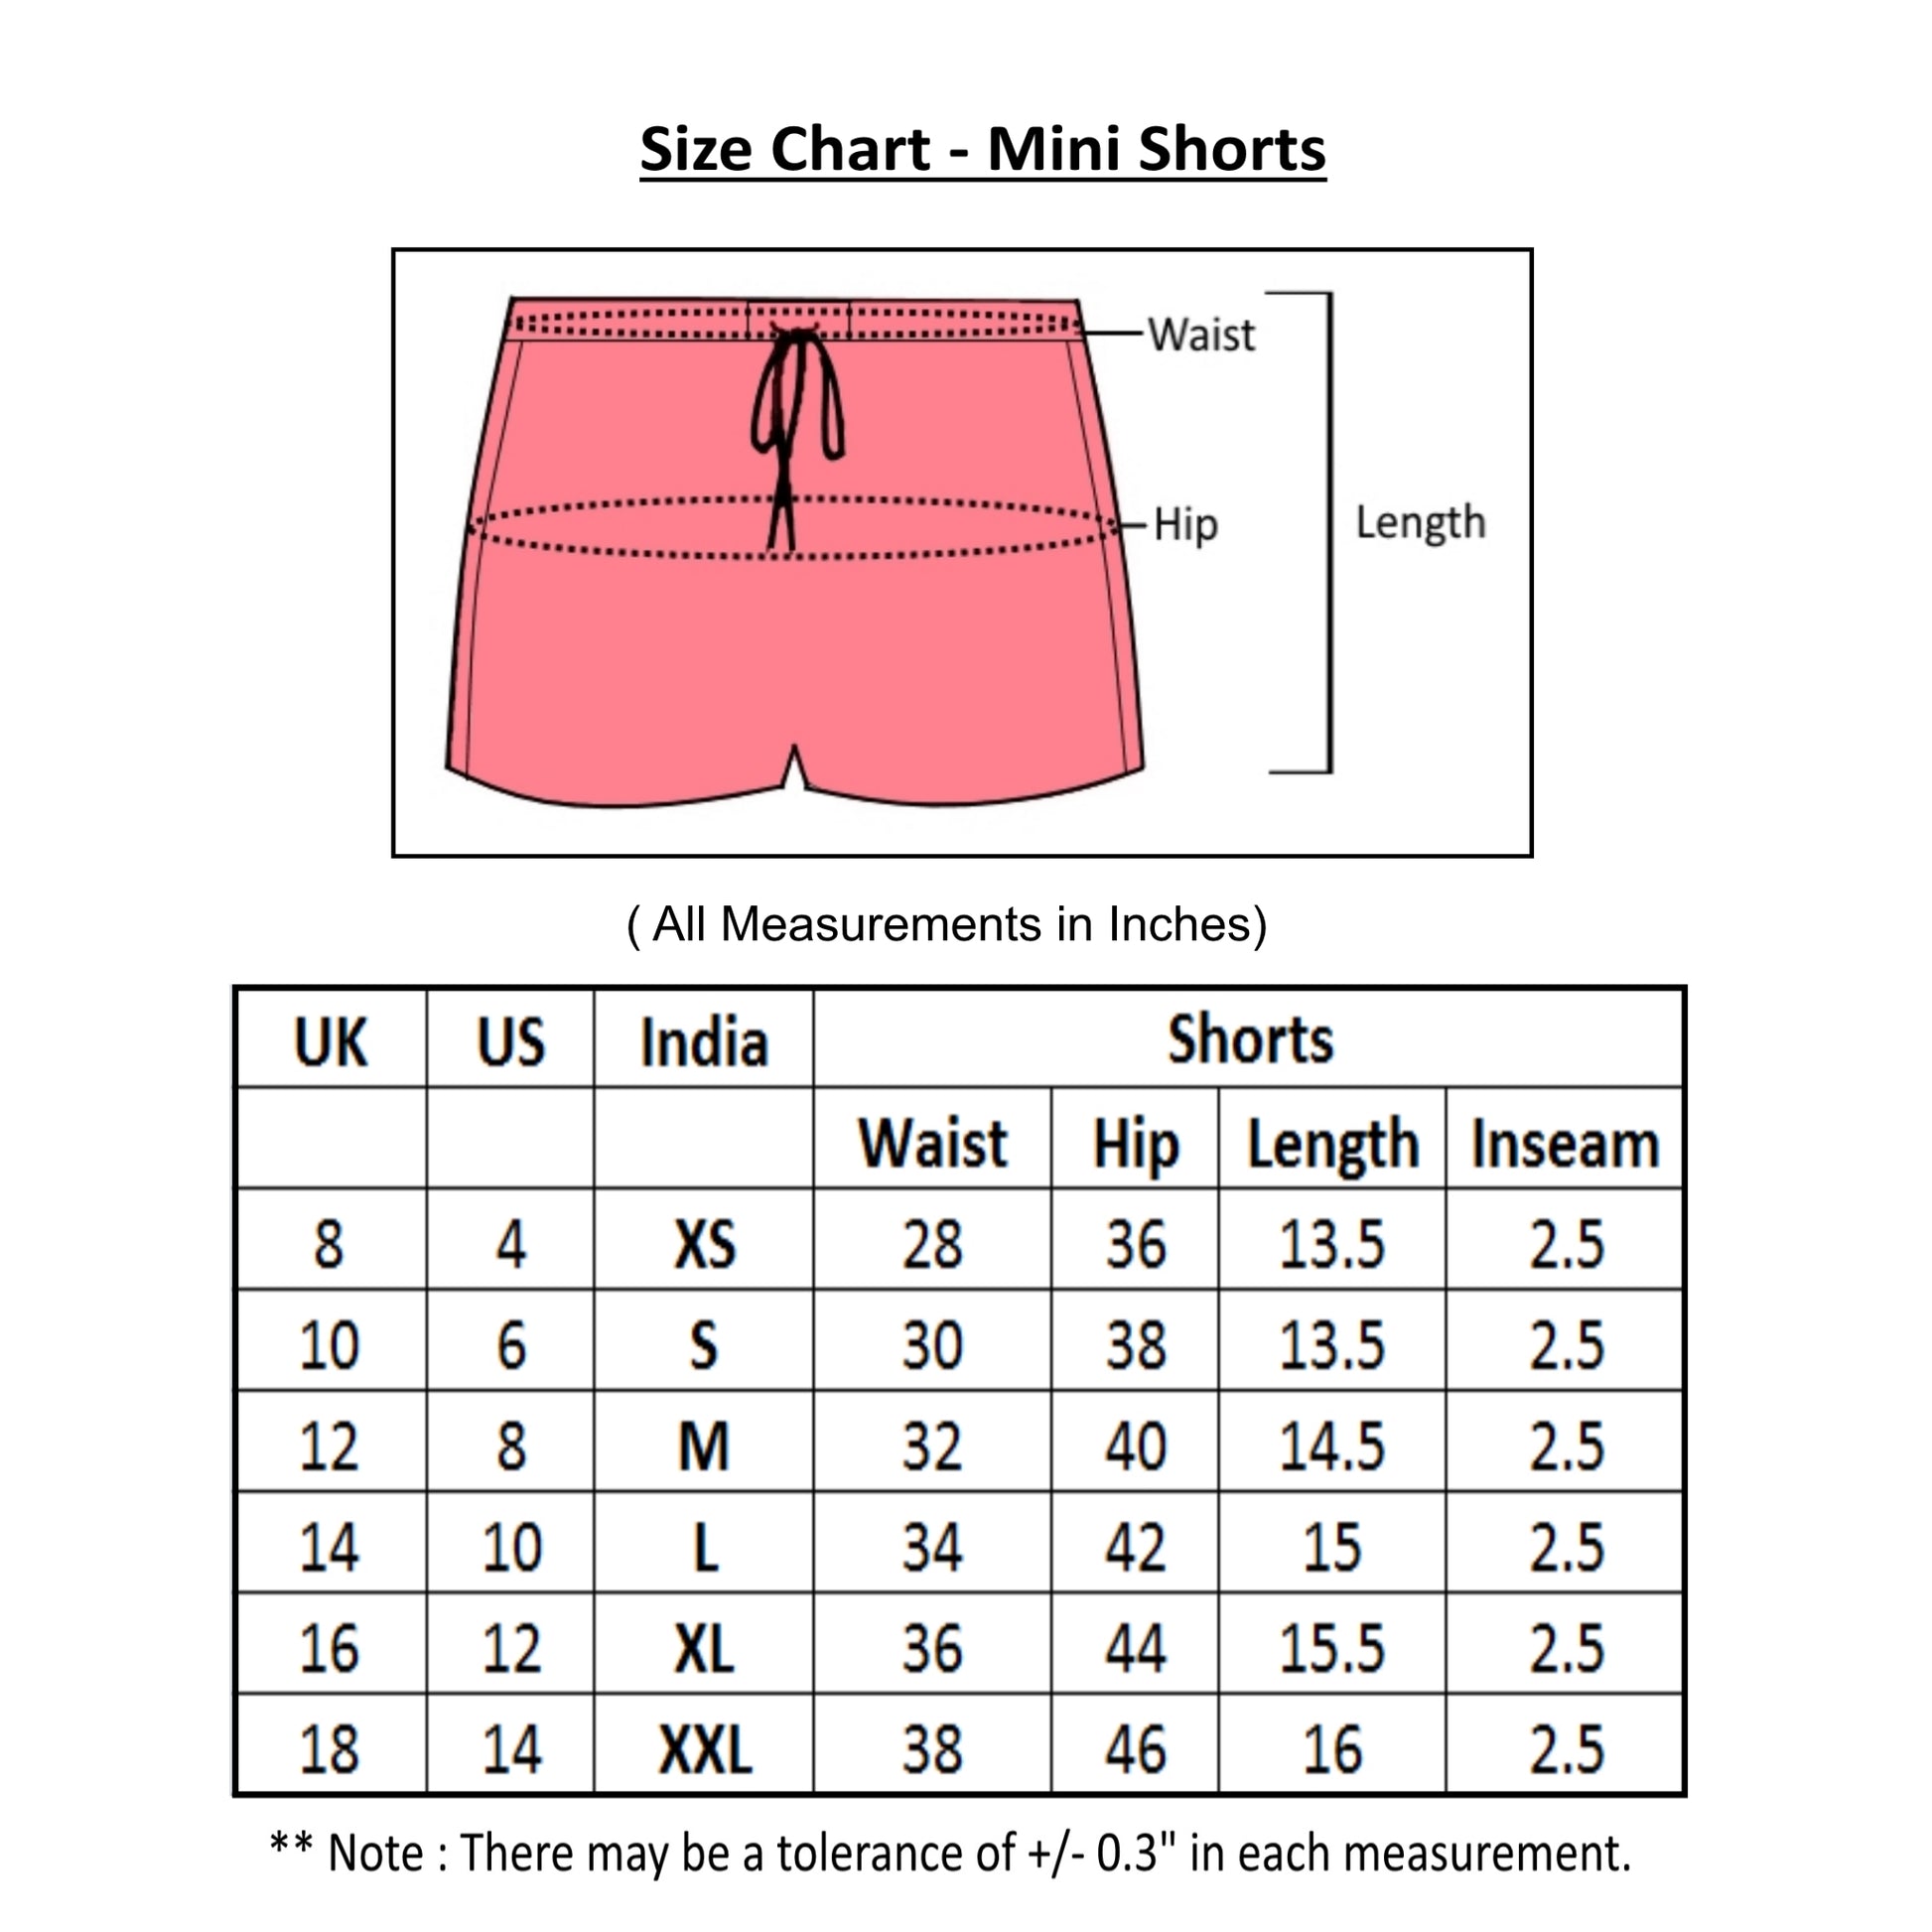 size chart of mini shorts with measurement details for all sizes